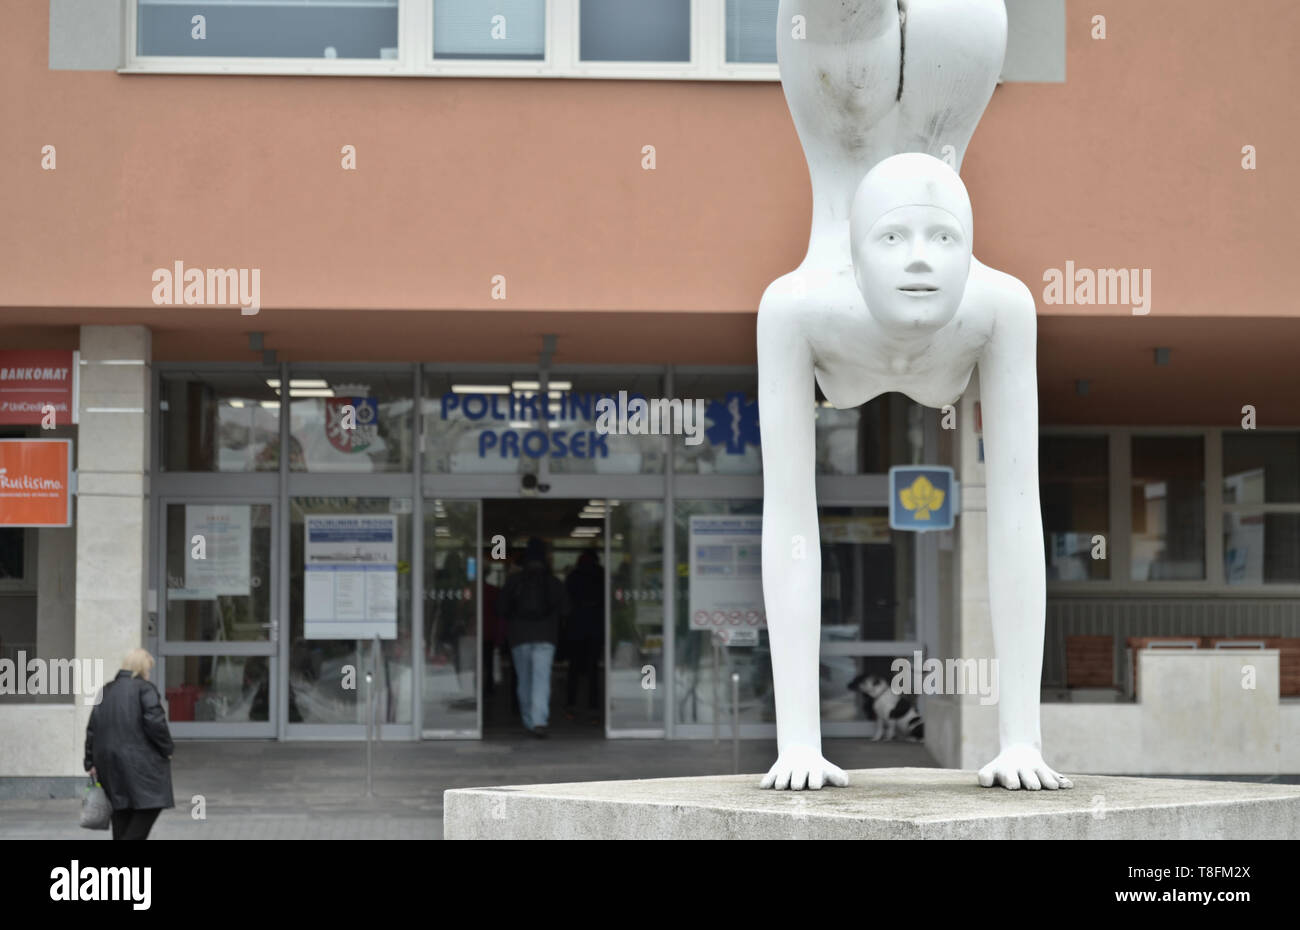 Prague / Czech Republic - May 6 2019: Statue of a dancing/gymnast girl in front of Health Center (Poliklinika) Prosek Stock Photo